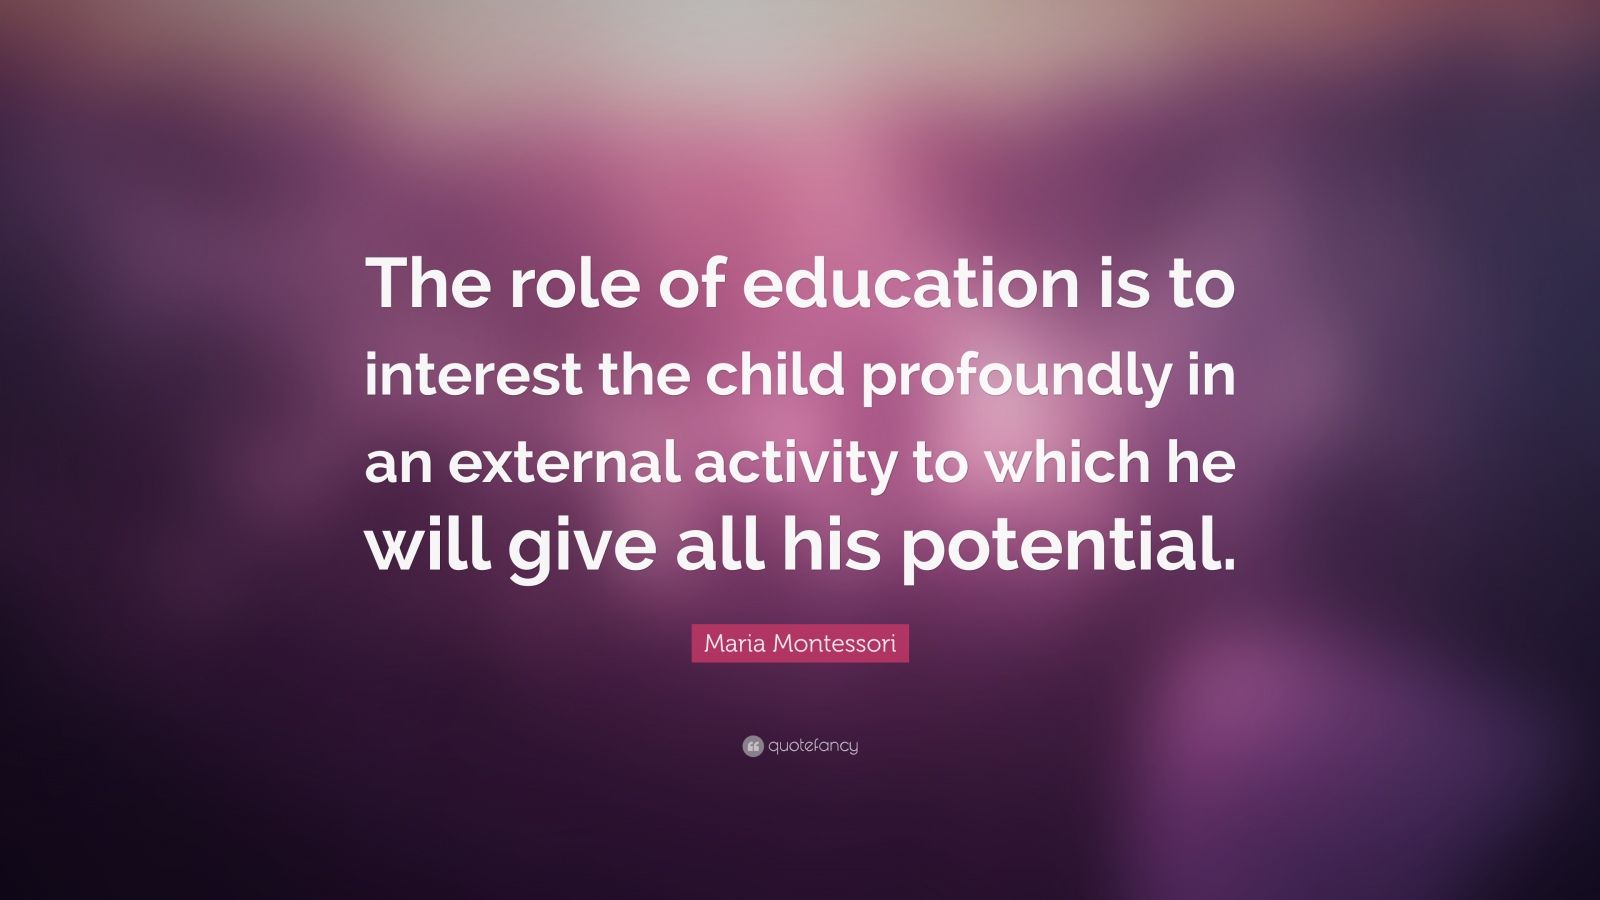 Maria Montessori Quote: “The role of education is to interest the child